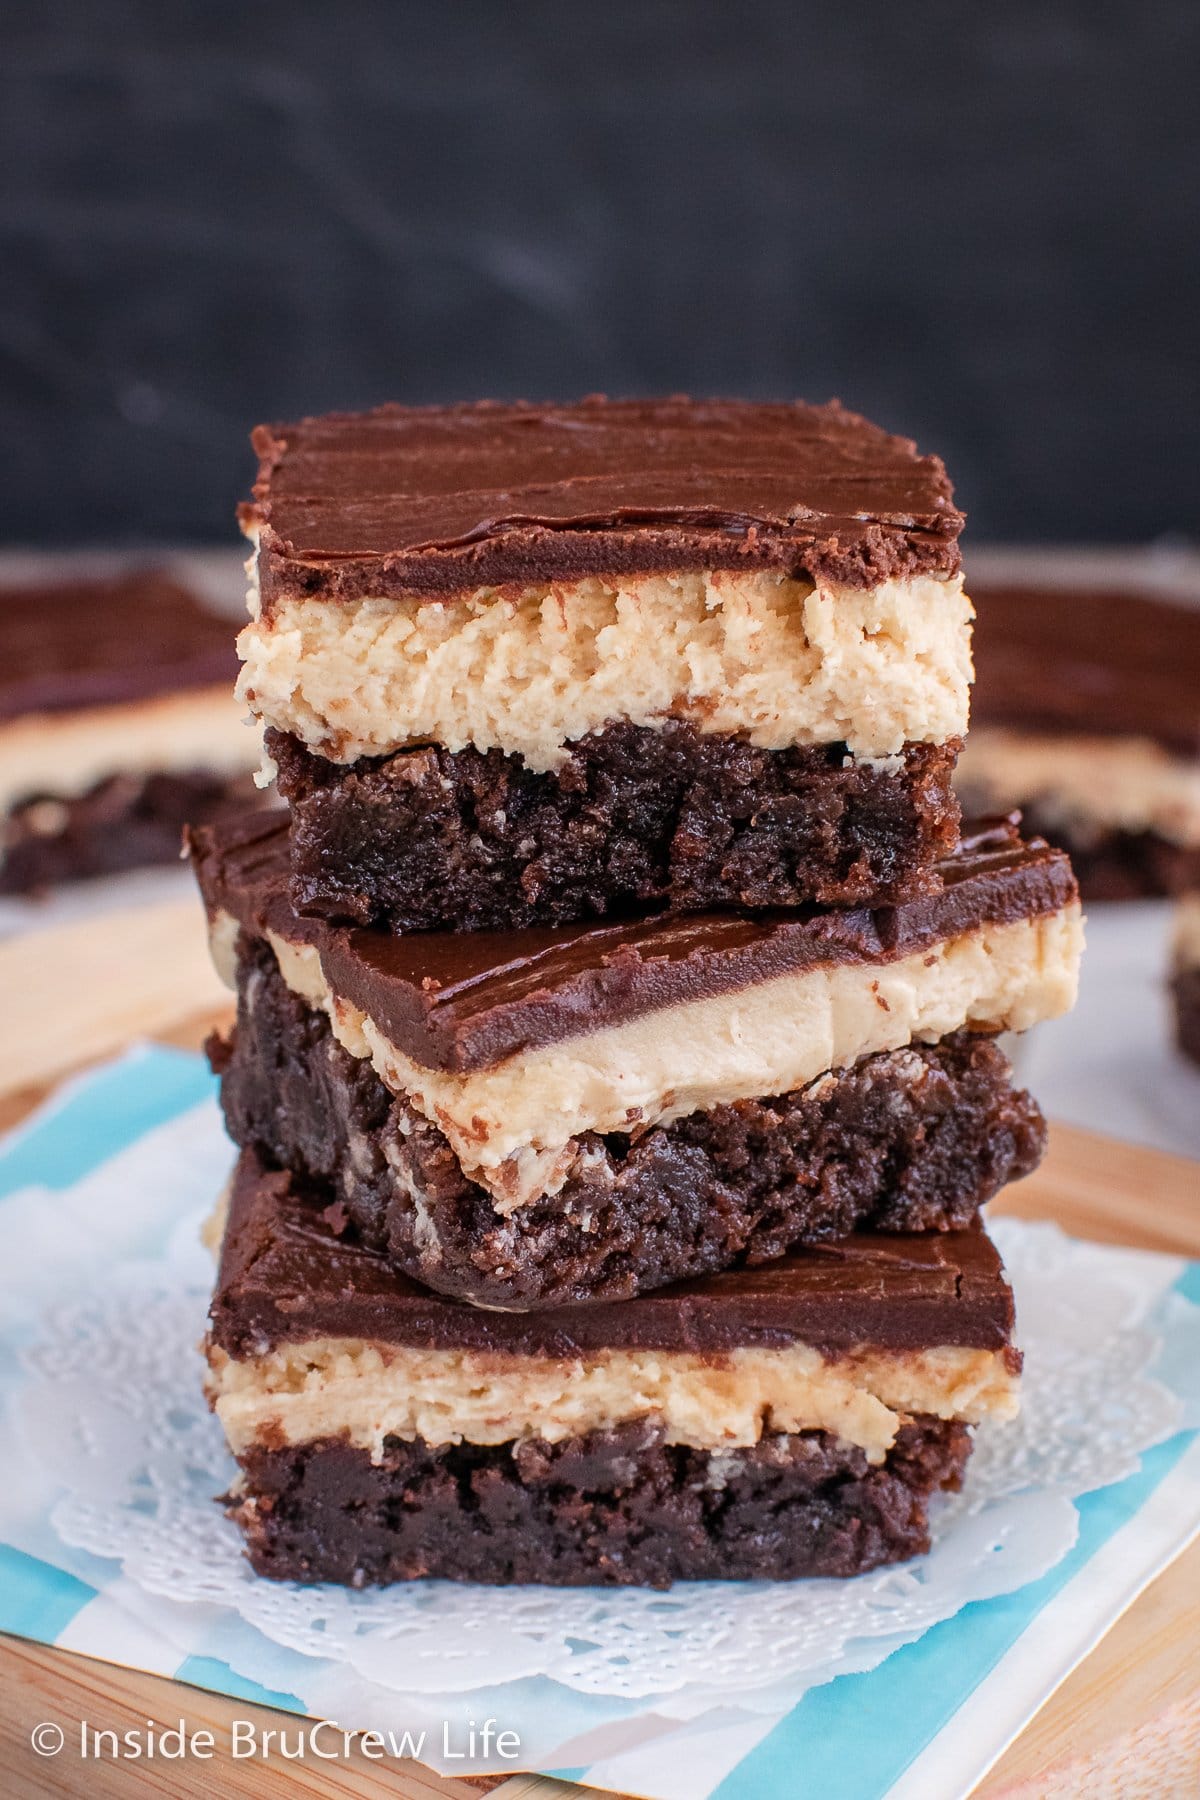 Three chocolate brownies with peanut butter filling stacked on a paper.